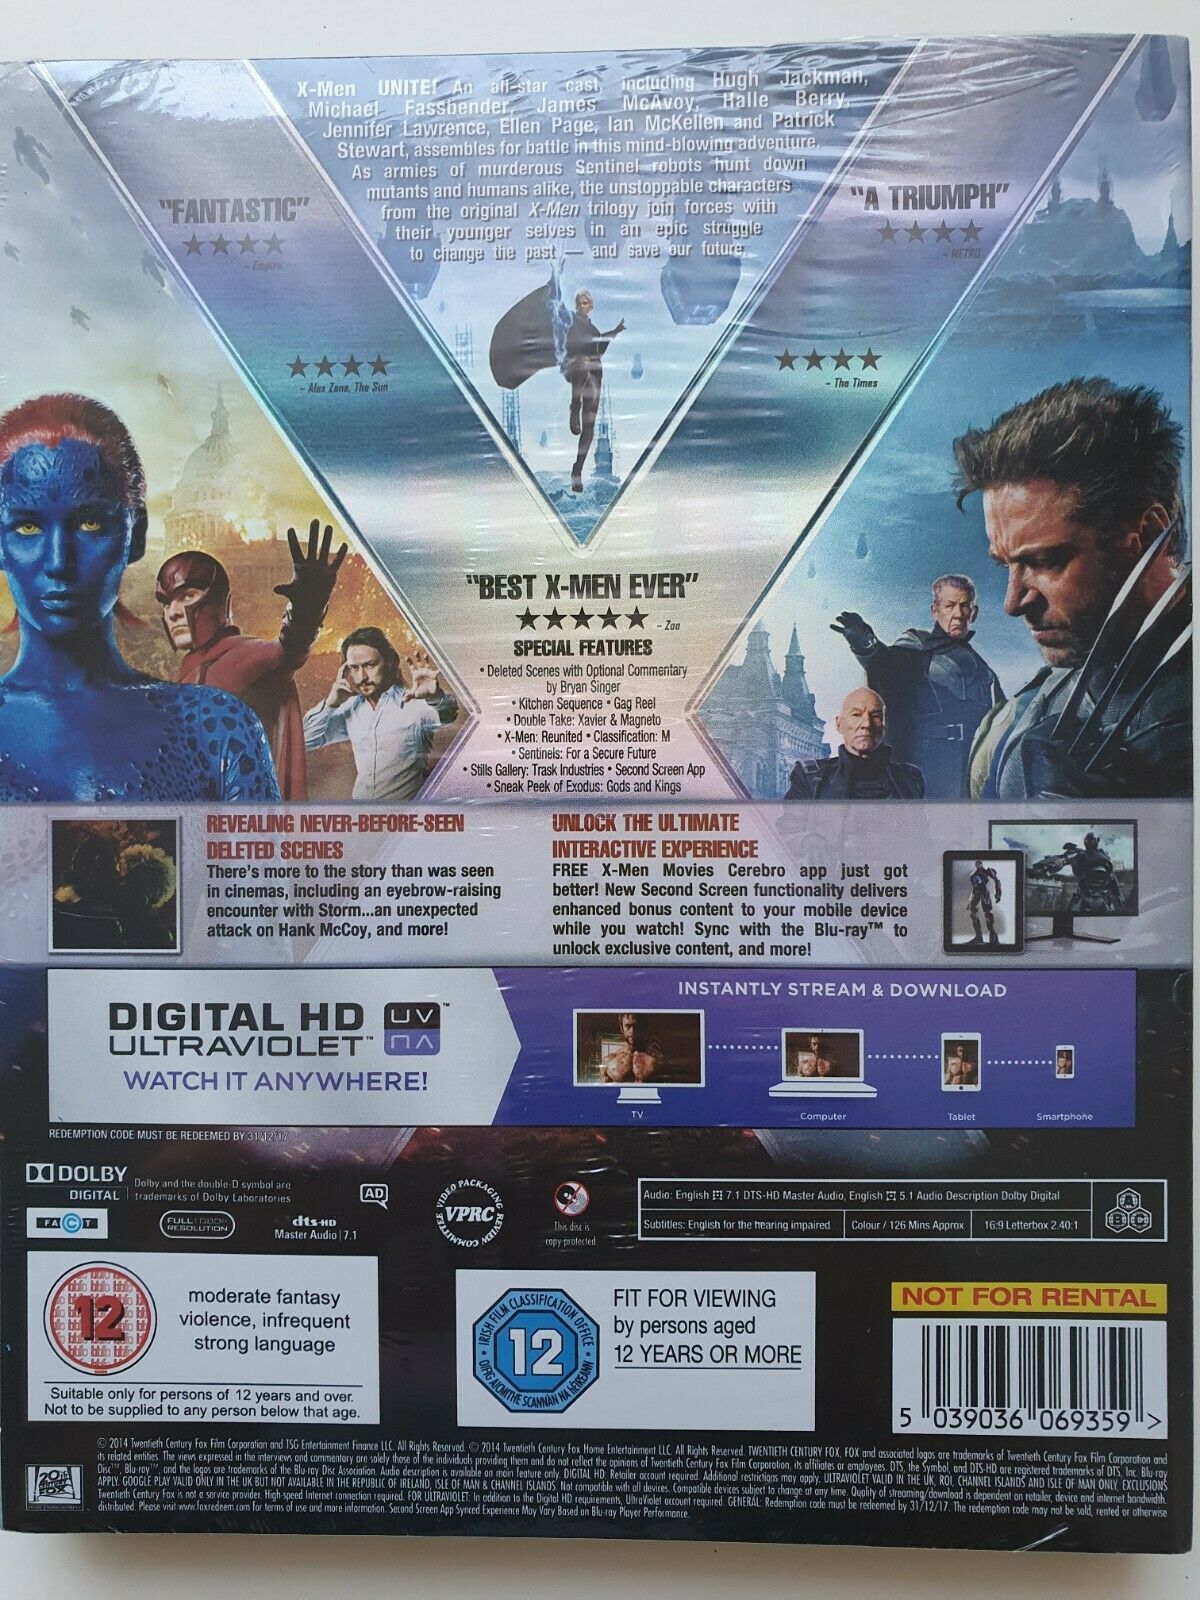 5039036069359 X-Men Days of Future Past Blu-ray + UV Digibook With Slipcase 2014